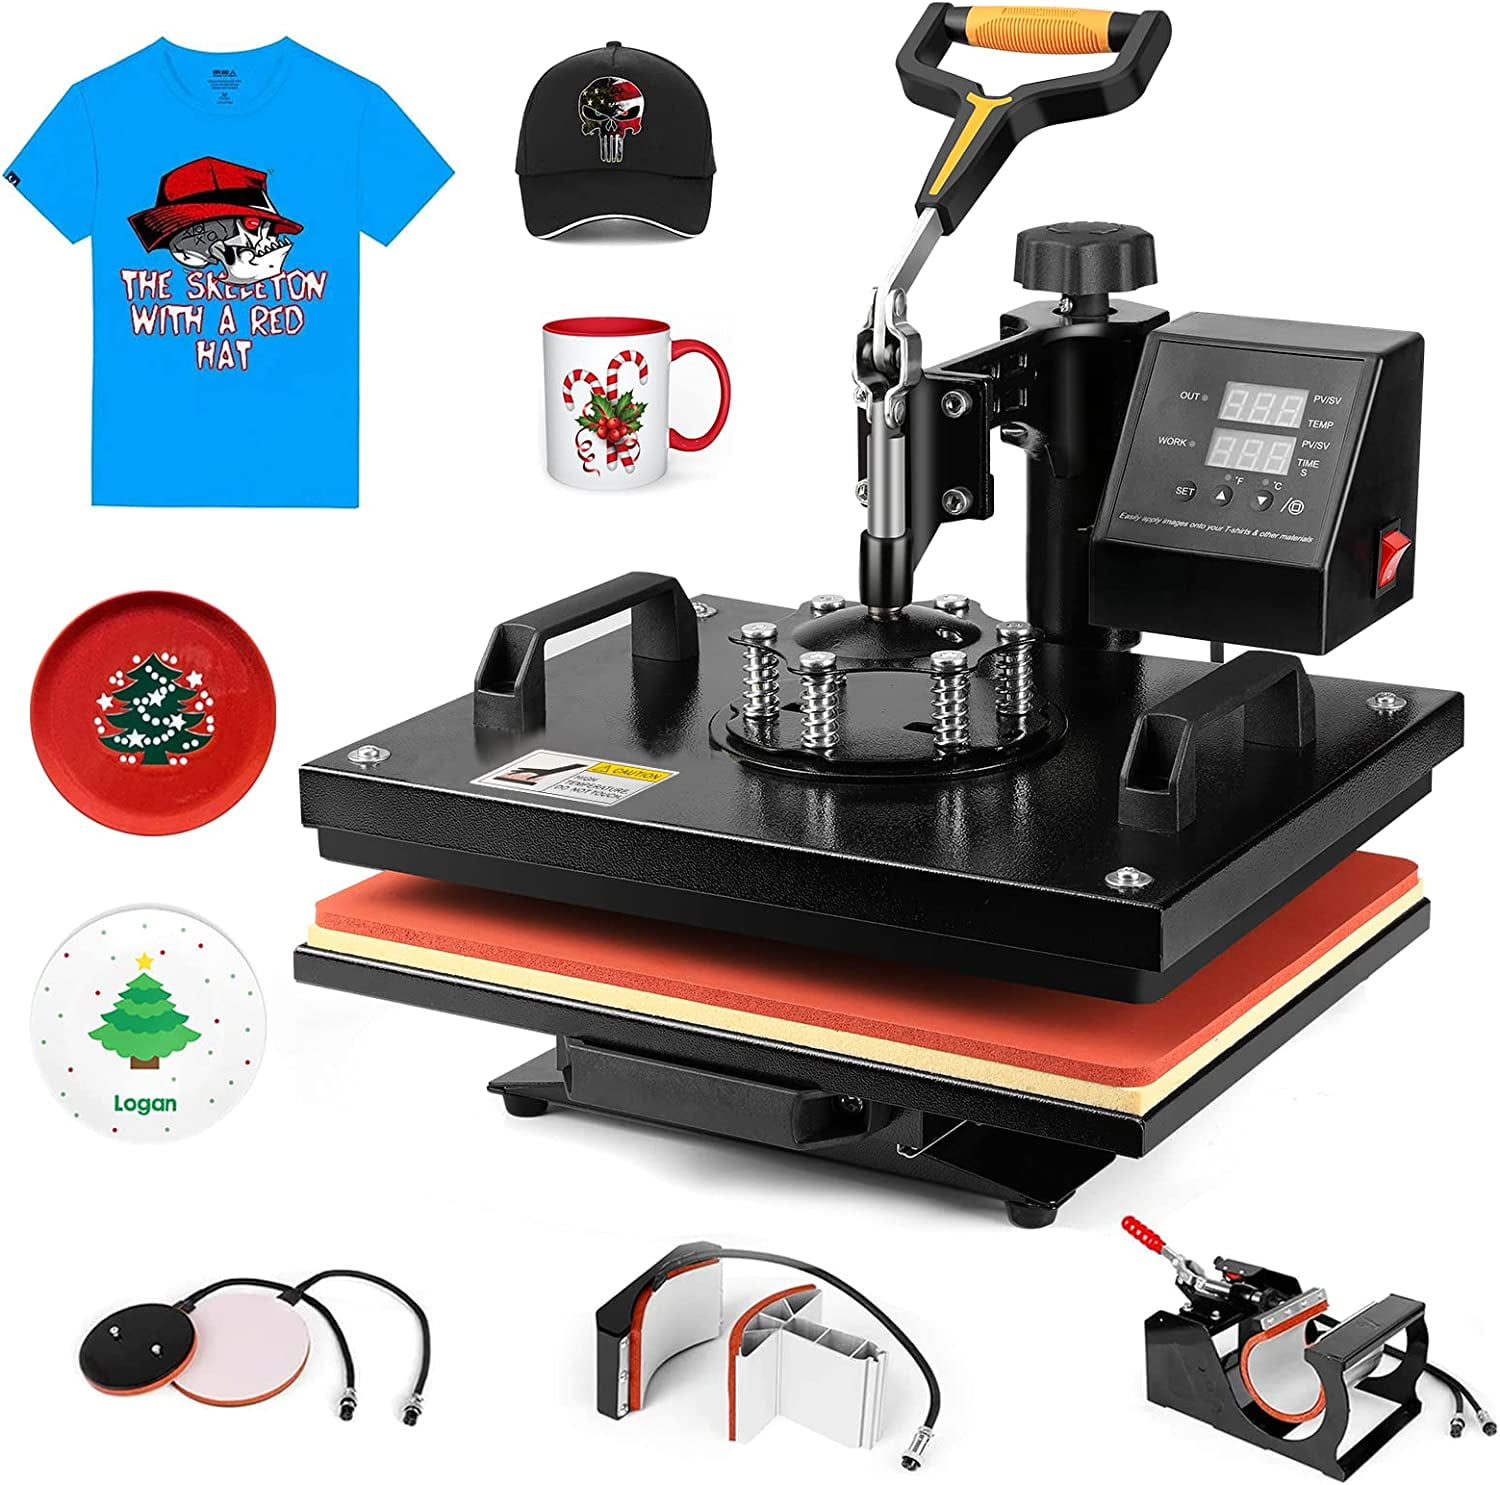 Aonesy 12×10 Heat Press Machine for T Shirts, Portable Heat Press Sublimation T-Shirt Printing Machine for Heating Transfer Projects, Bags, Hat